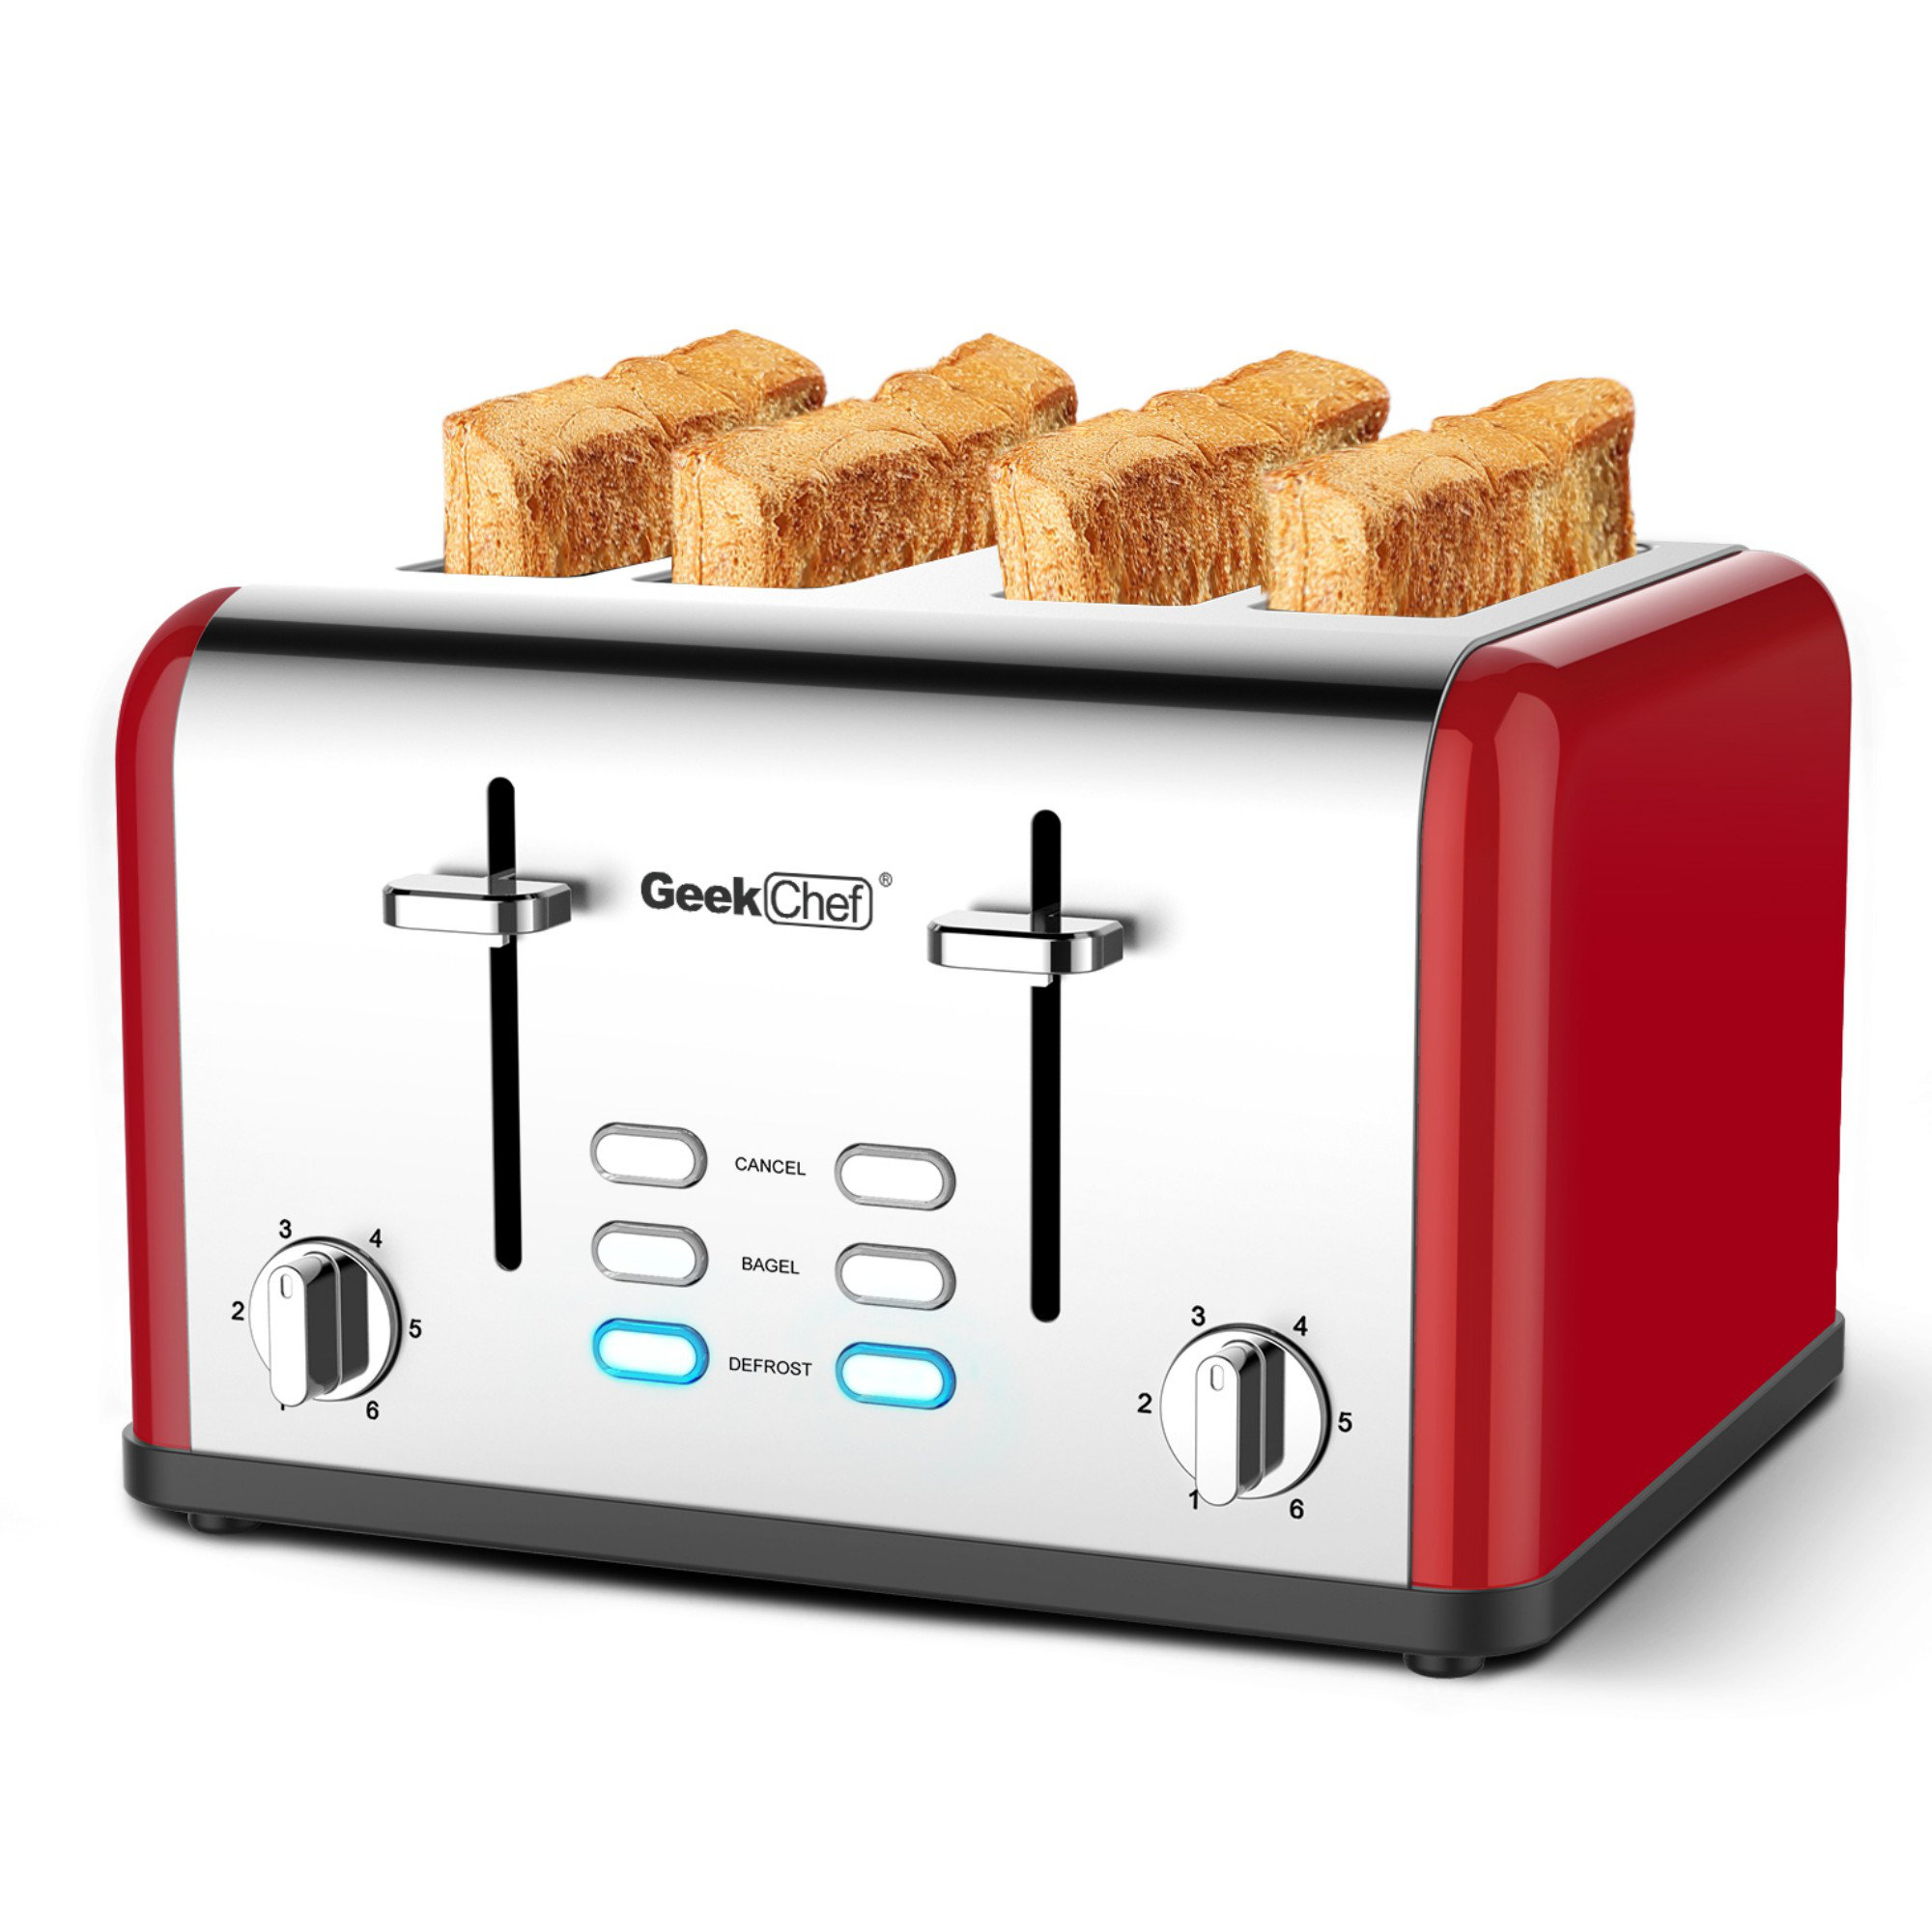 Kenmore 2-Slice Toaster, White Stainless Steel, Extra Wide Slots, Bagel and  Defrost Functions, 9 Browning Levels, Removable Crumb Tray, for Bread